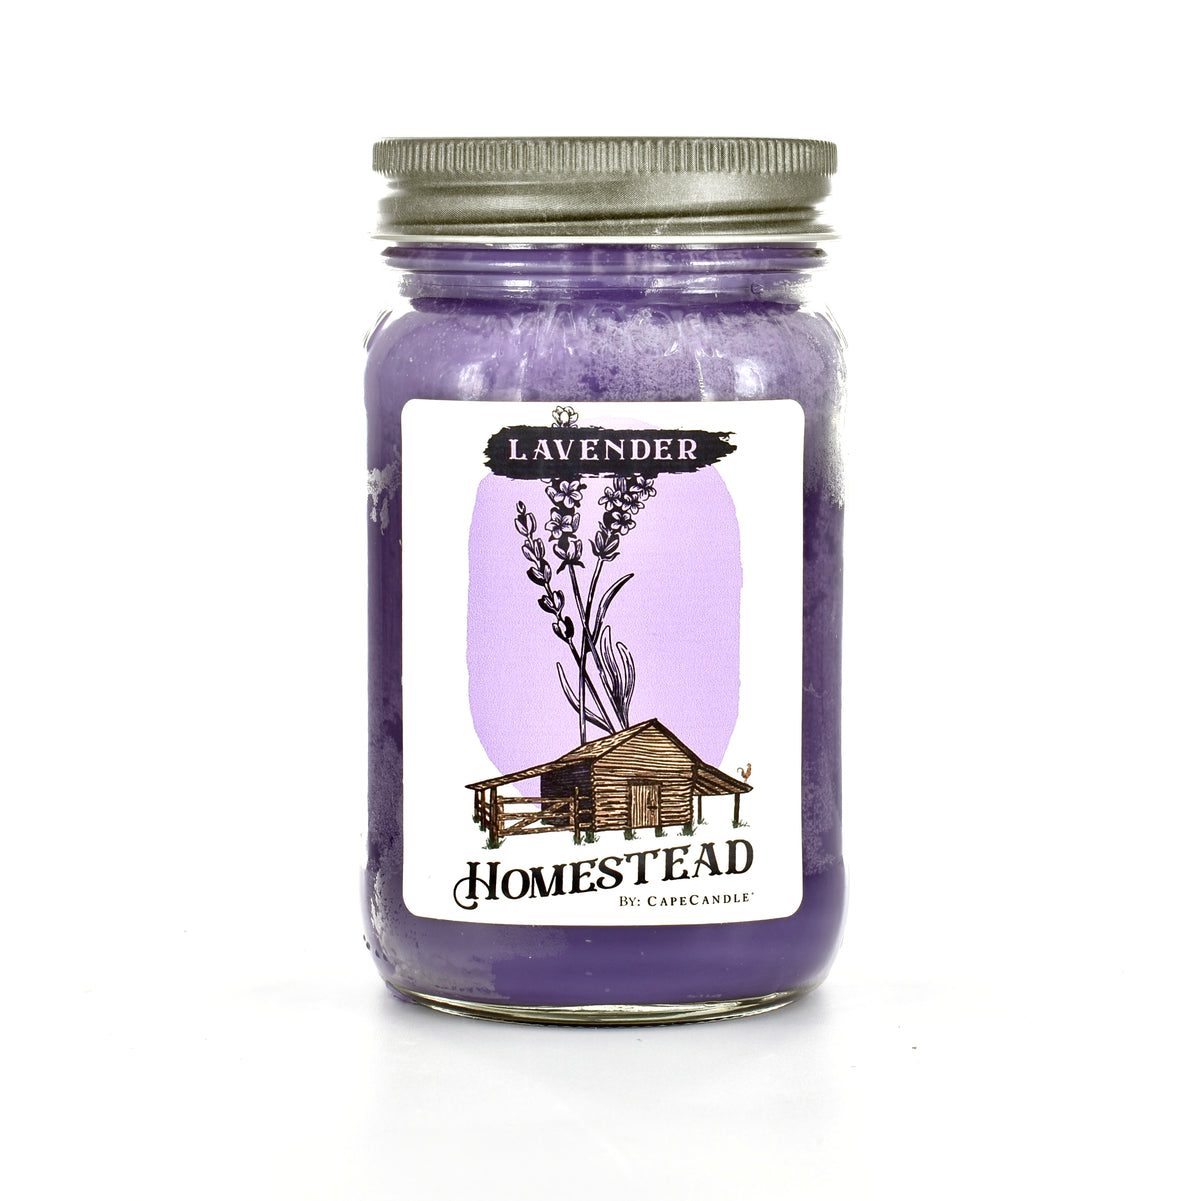 Lavender Soy Wax Candle